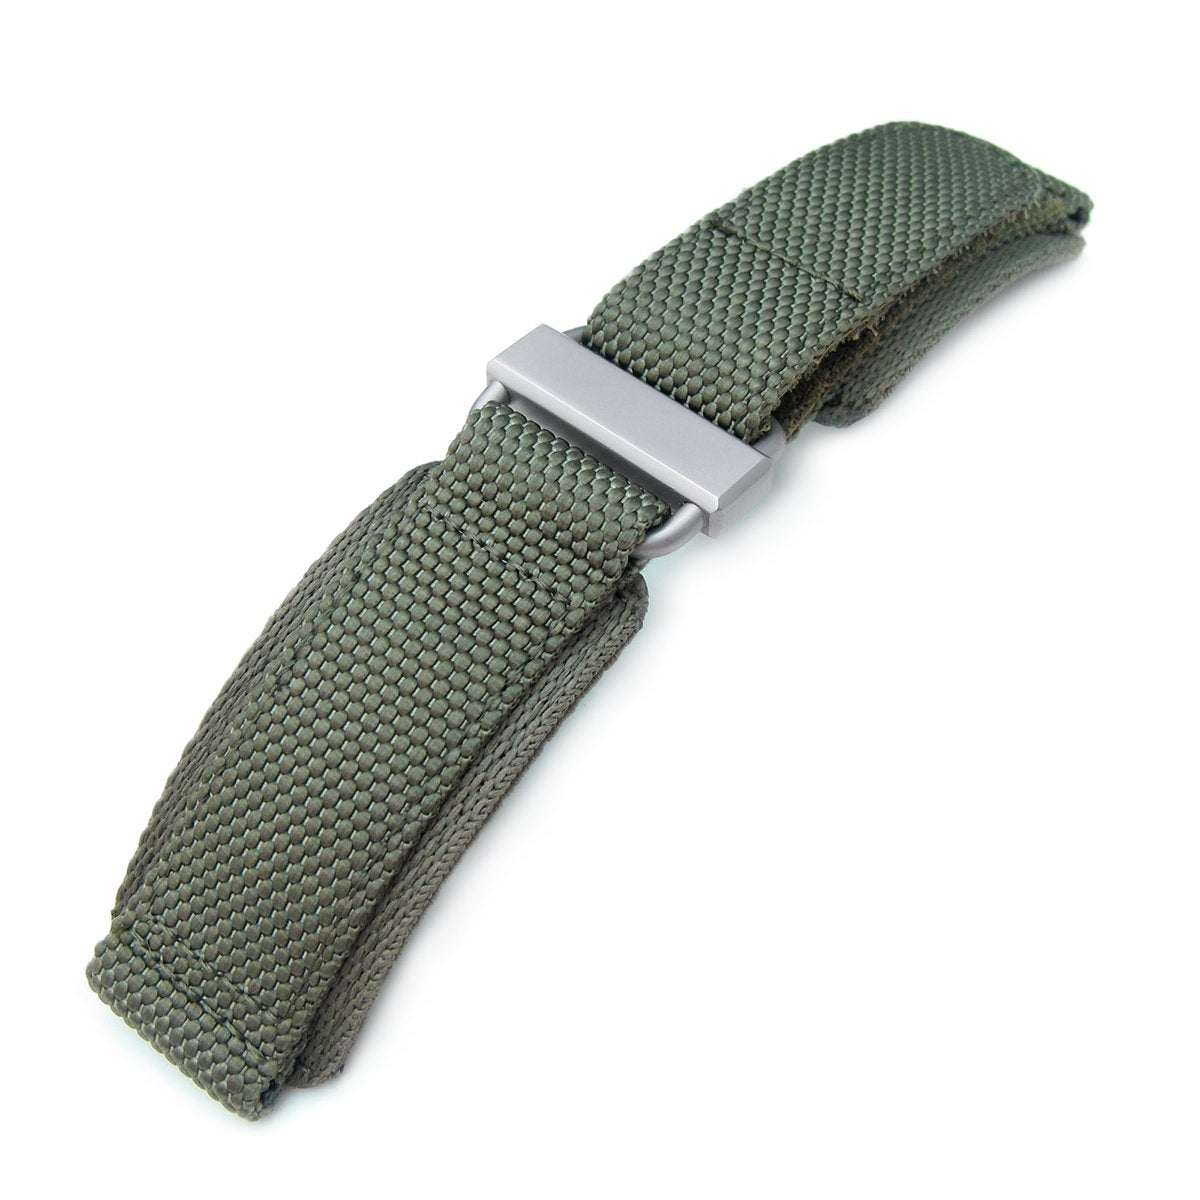 22mm MiLTAT Honeycomb Military Green Nylon Velcro Fastener Watch Strap Brushed Stainless Buckle XL Strapcode Watch Bands